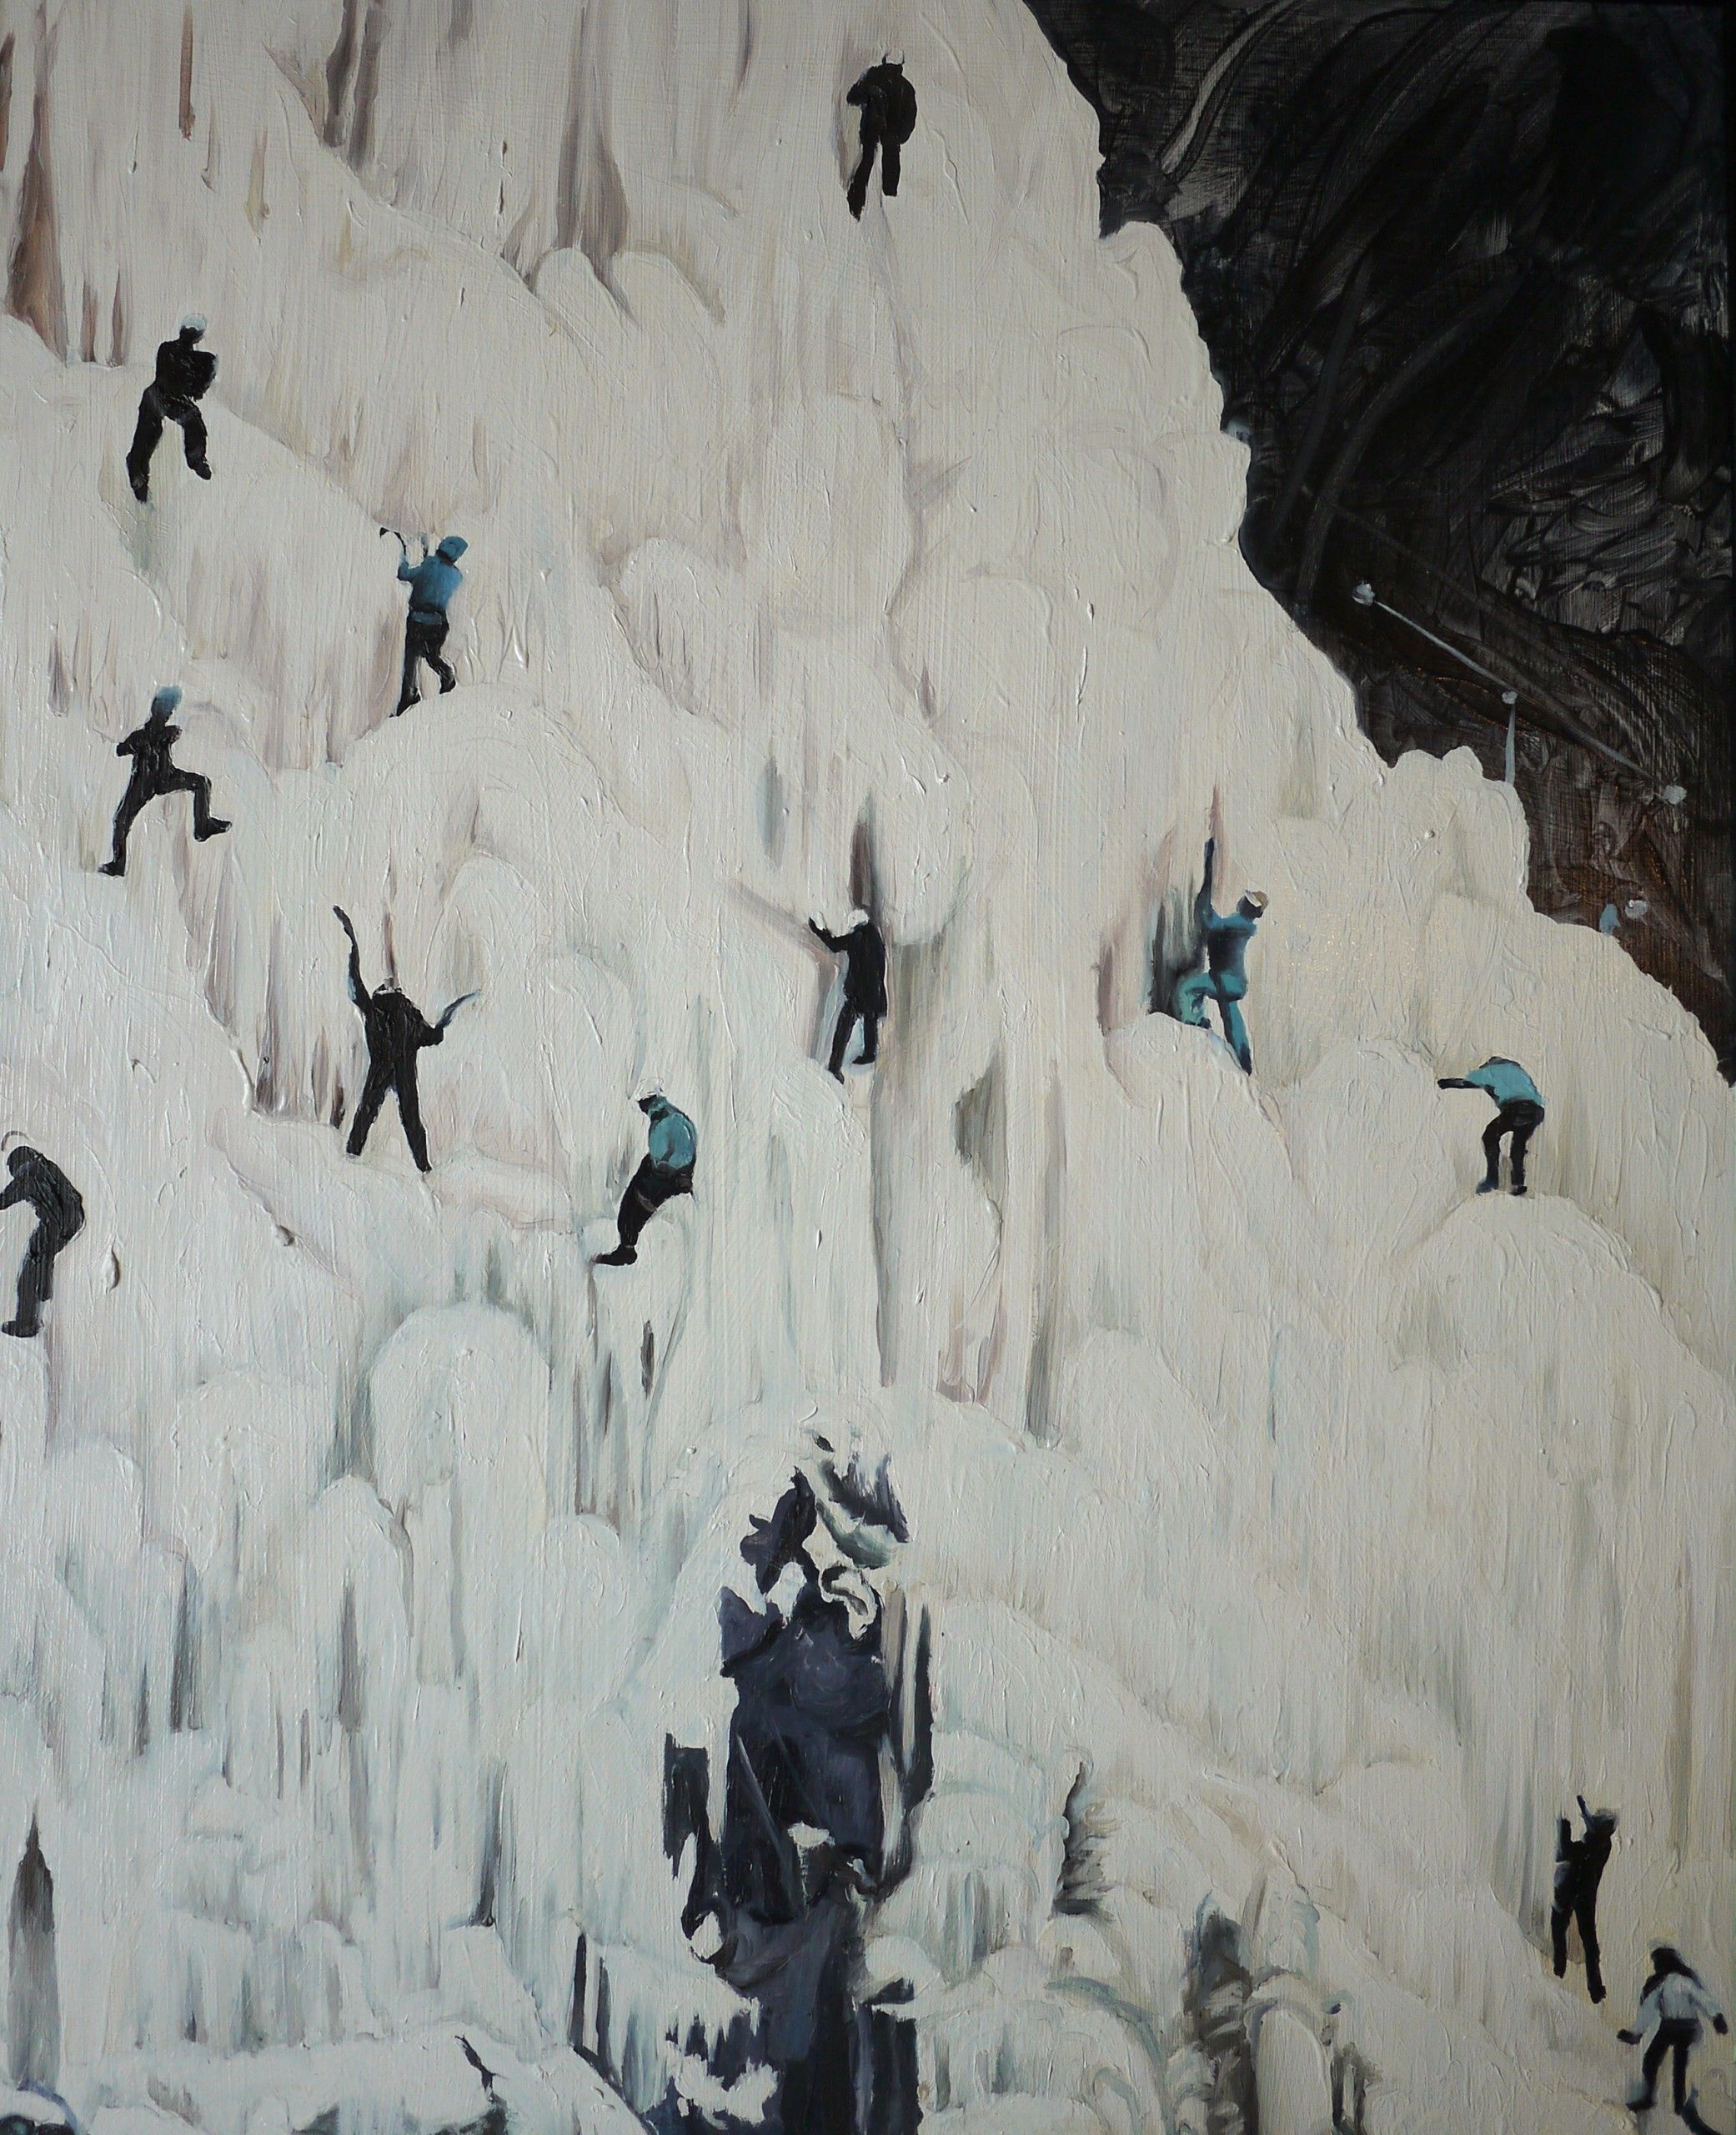 Climbers no.1 by Emily Hillier